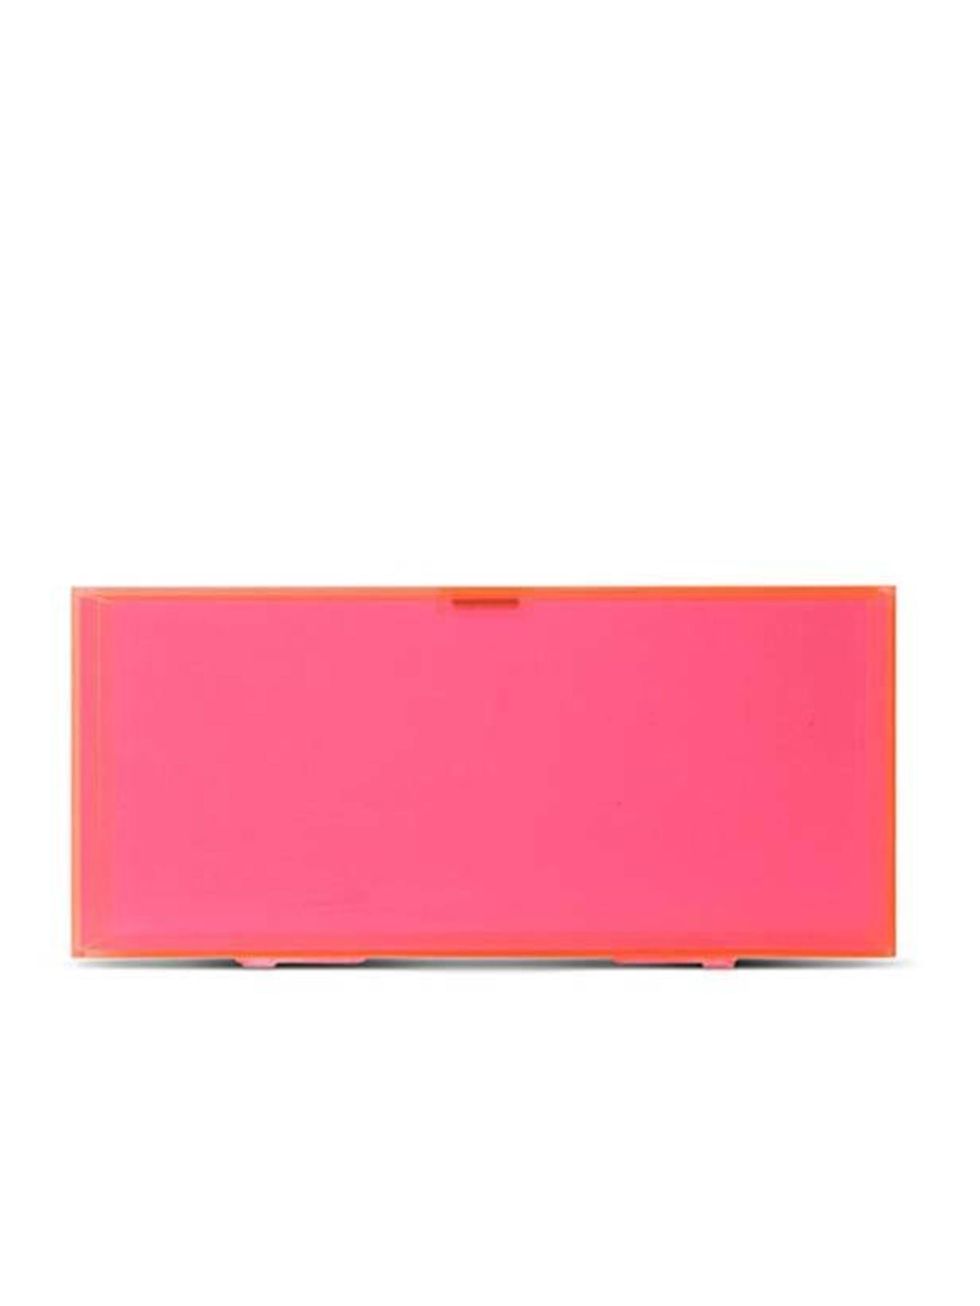 <p>Simone Rocha perspex clutch, £275, at <a href="http://www.selfridges.com/en/Features-Gifts/Categories/Bright-Young-Things/Women/Perspex-clutch_236-3002093-BAG10999SOR/">Selfridges </a></p>